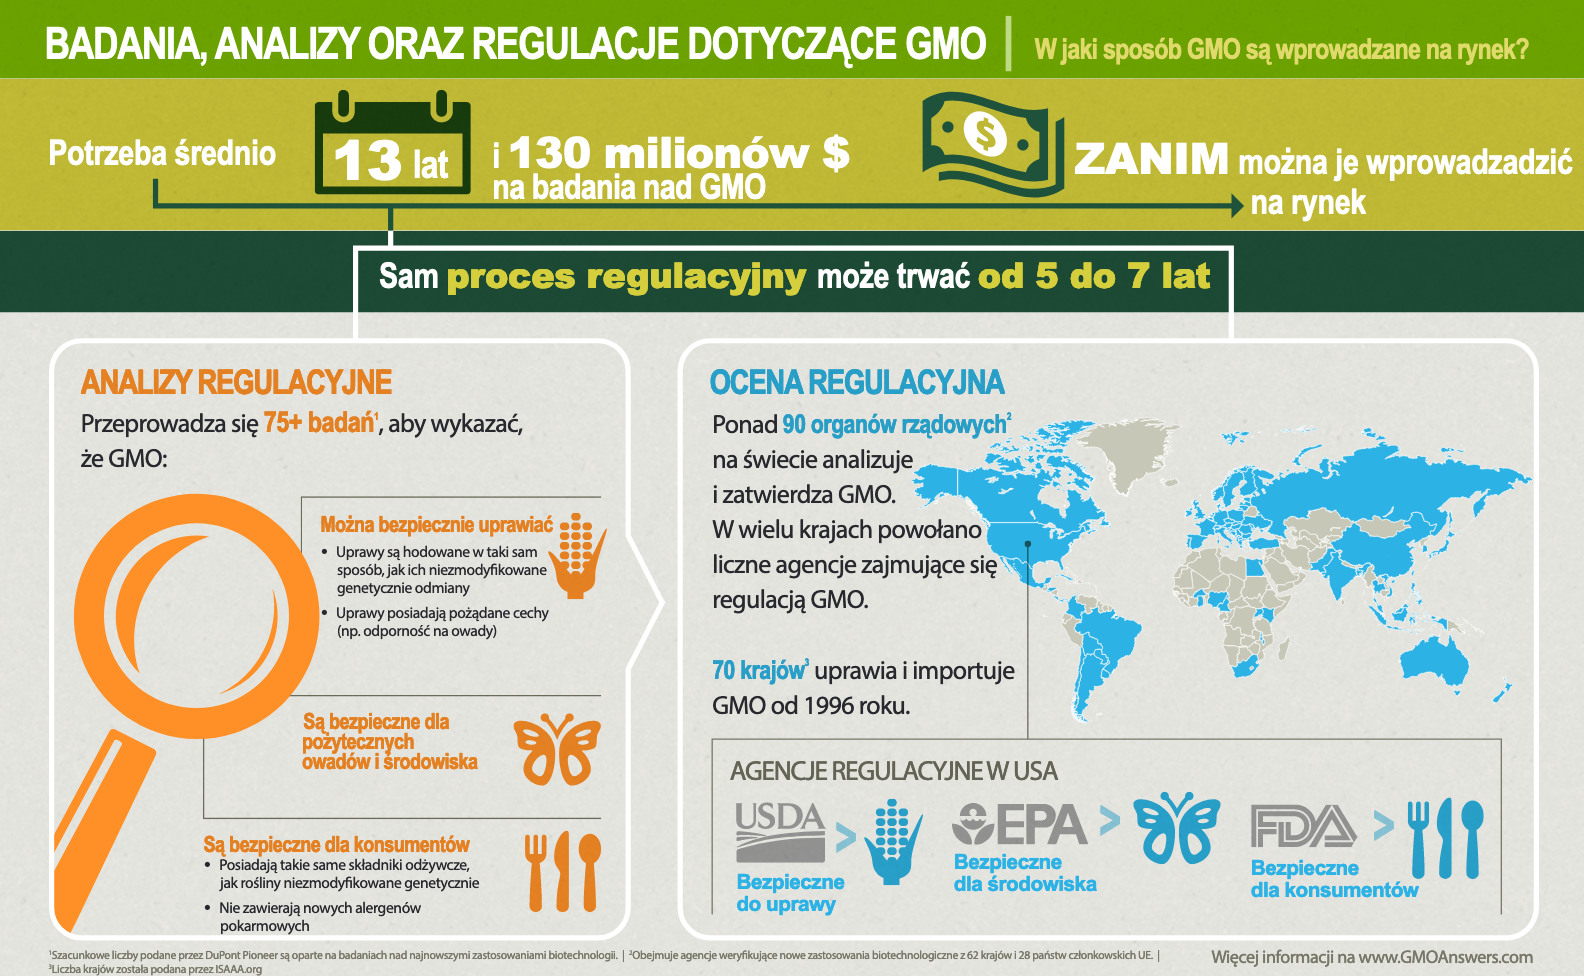 GMO Research, Review and Regulation